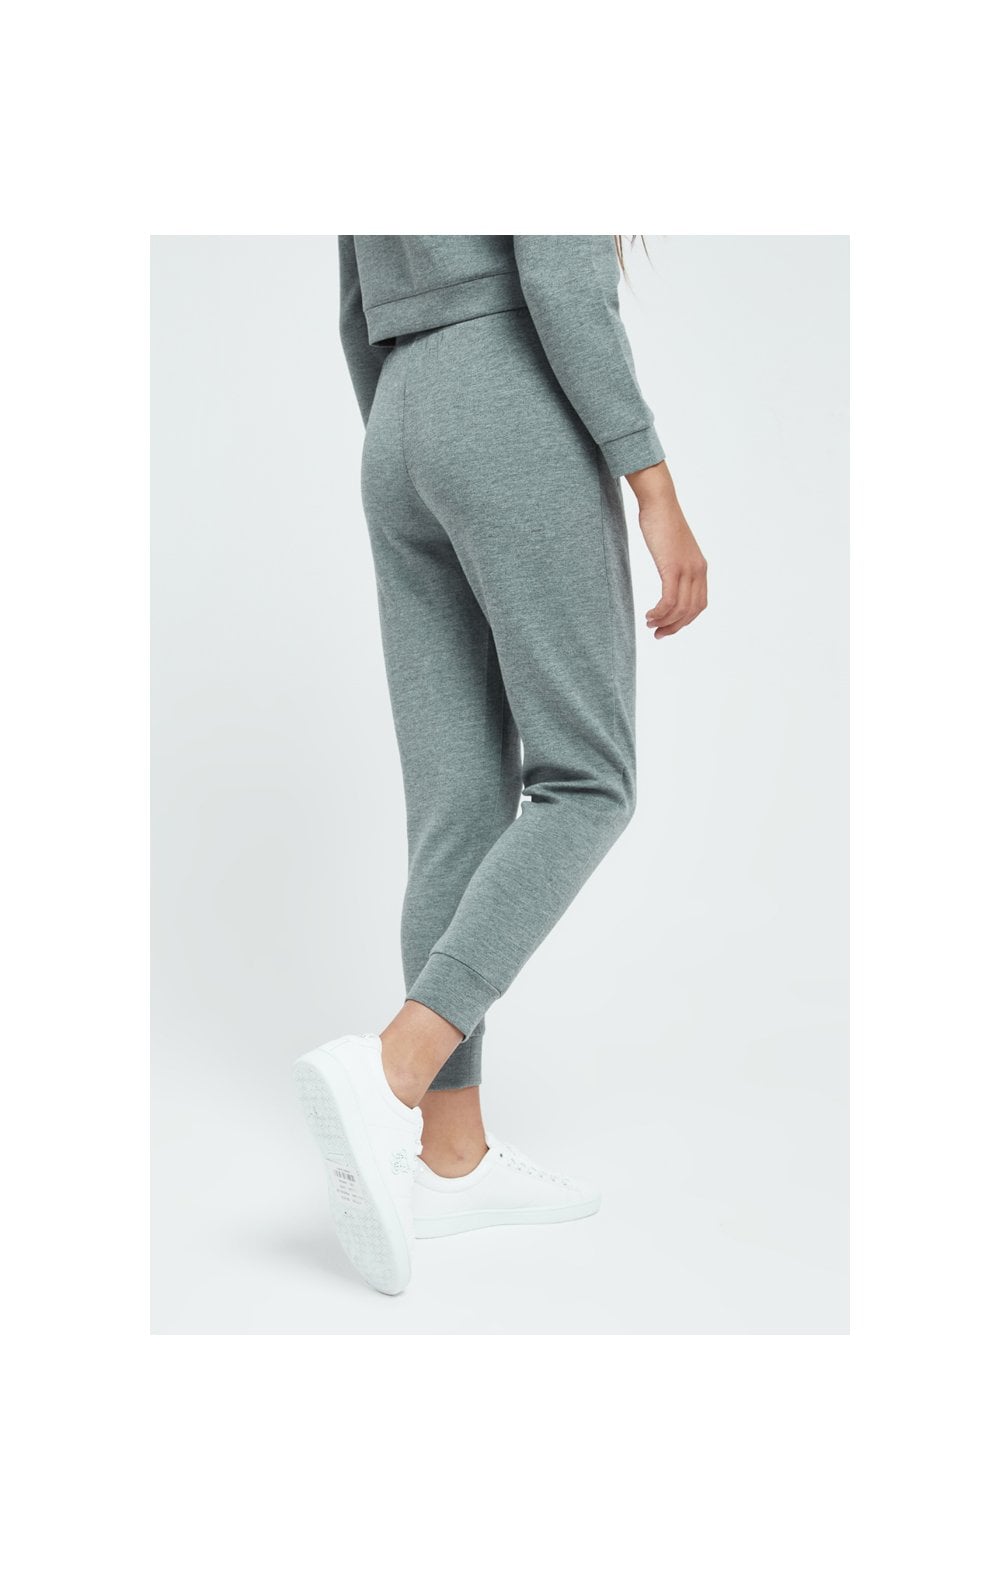 Load image into Gallery viewer, Illusive London Dual Track Pant - Grey Marl (3)